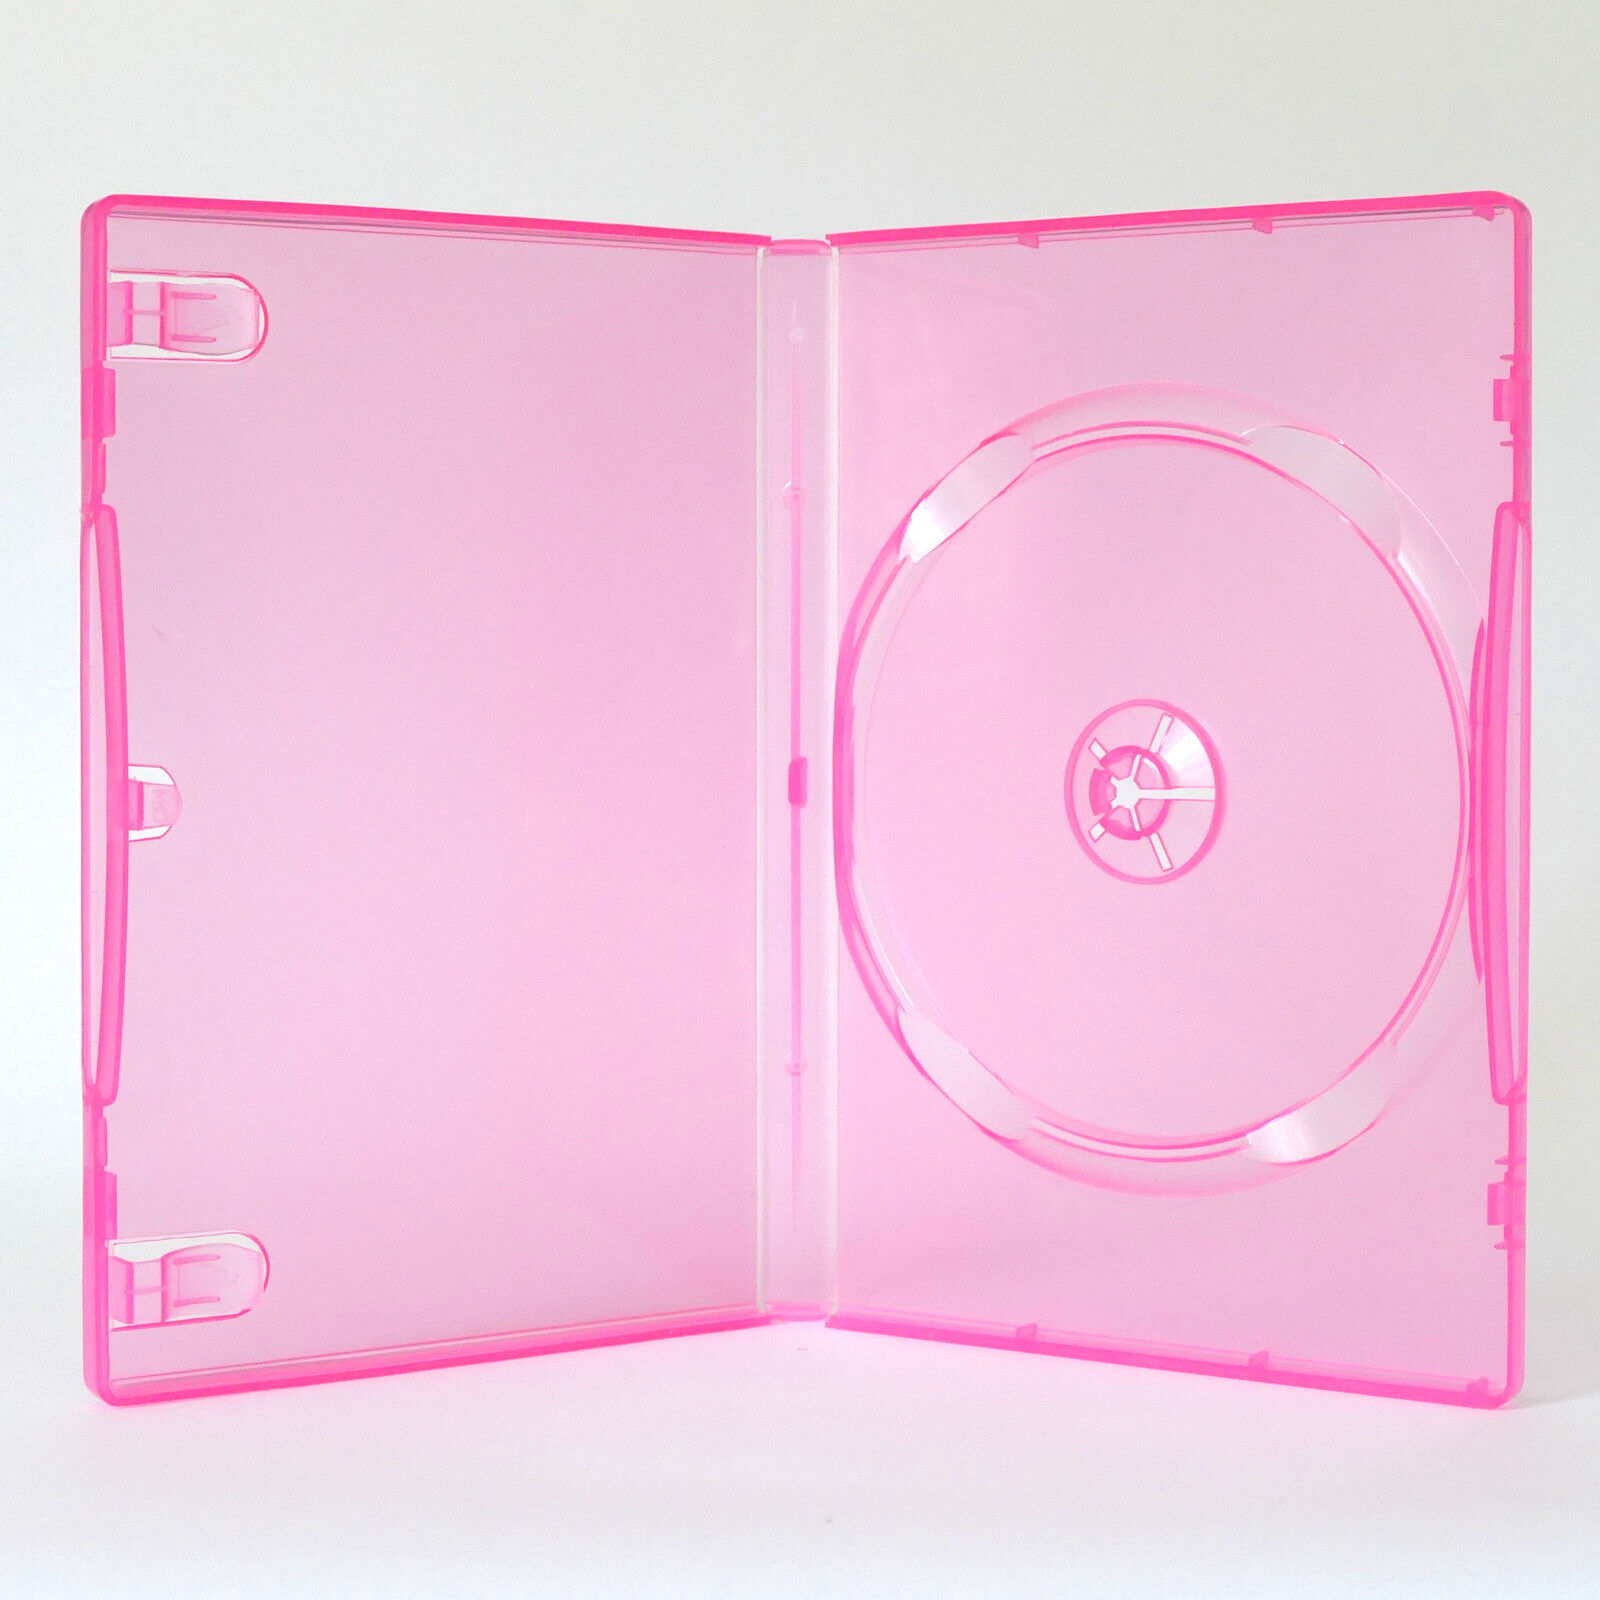 10 (TEN) Clear PINK Single DVD Cases Standard 14mm Color Tinted Sleeve LOT NEW